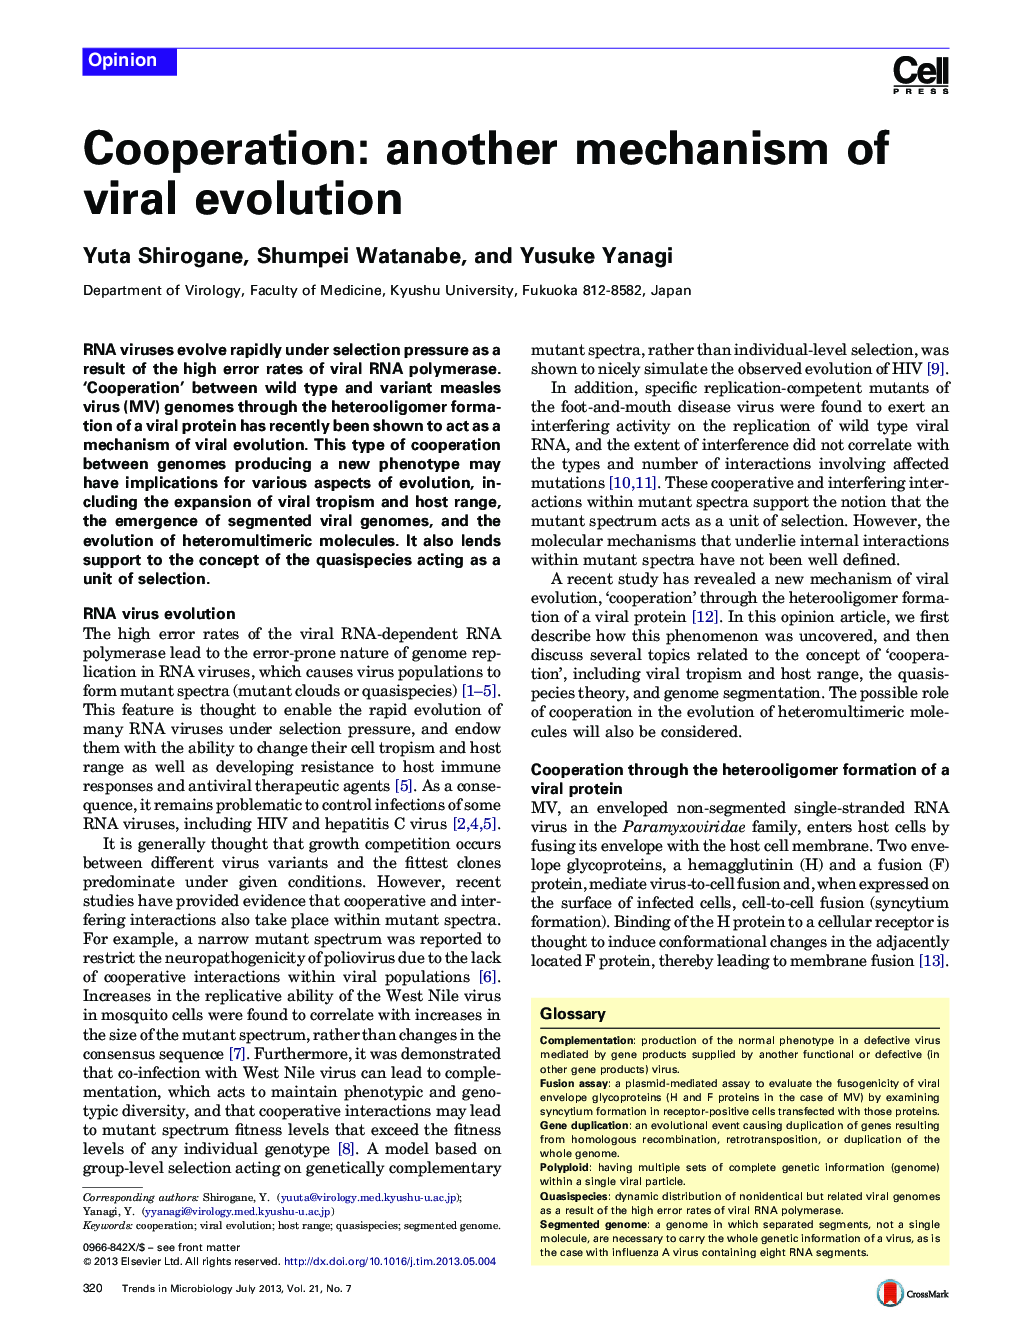 Cooperation: another mechanism of viral evolution